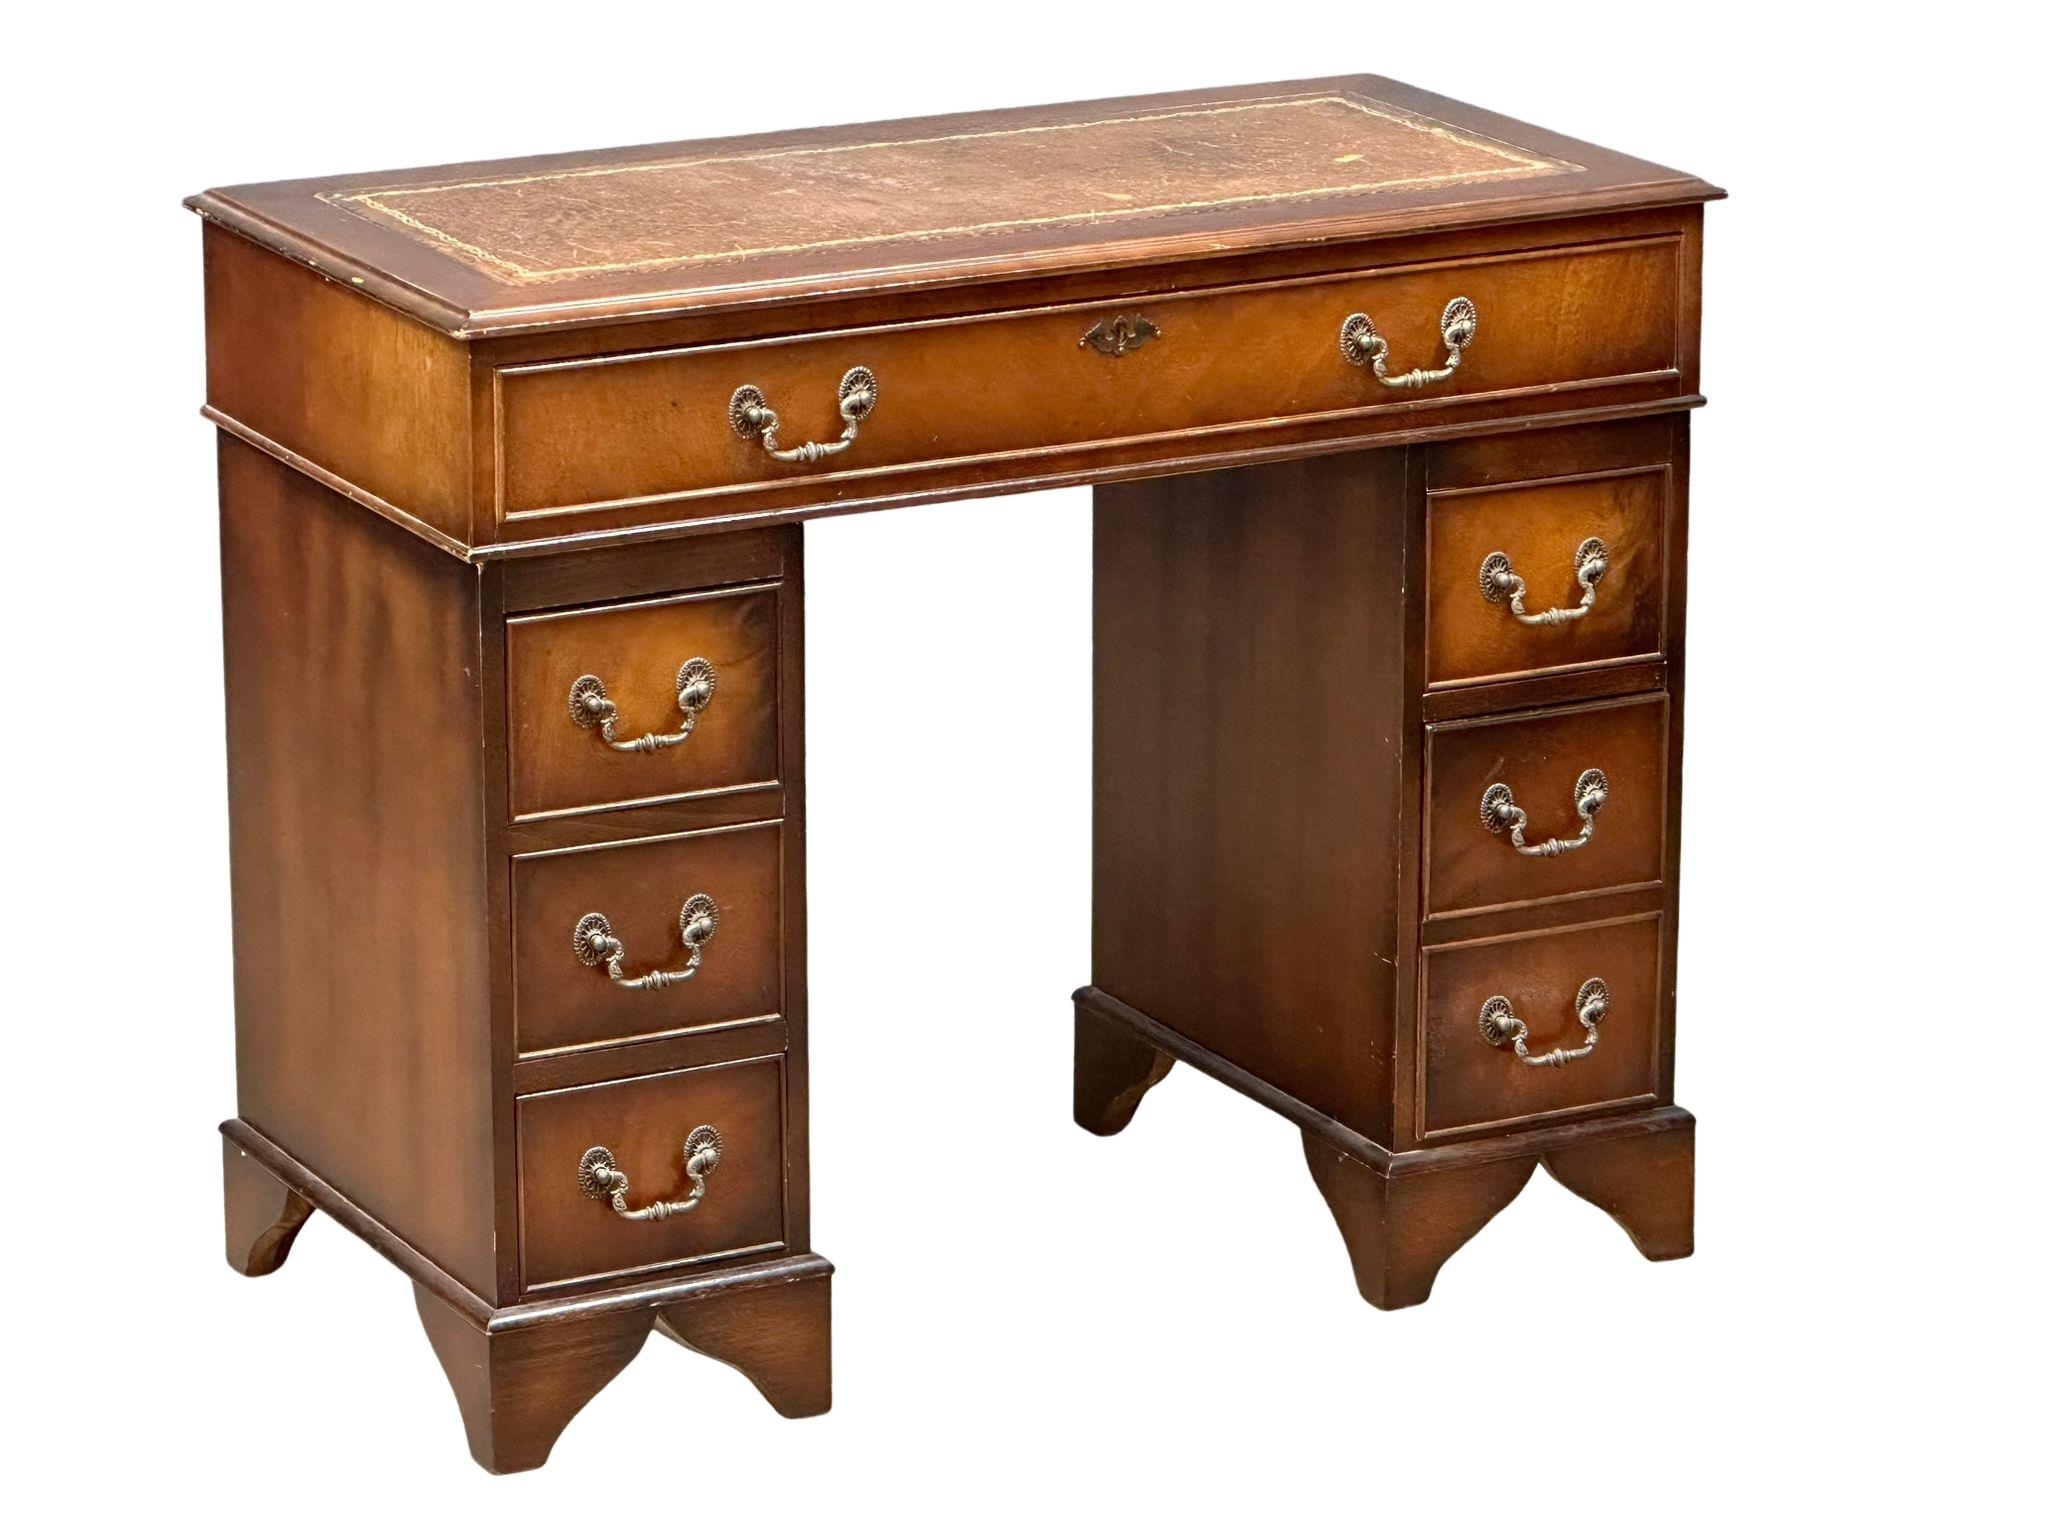 A small proportioned Georgian style mahogany pedestal desk with leather top, 91.5cm x 46cm x 76cm - Image 6 of 10